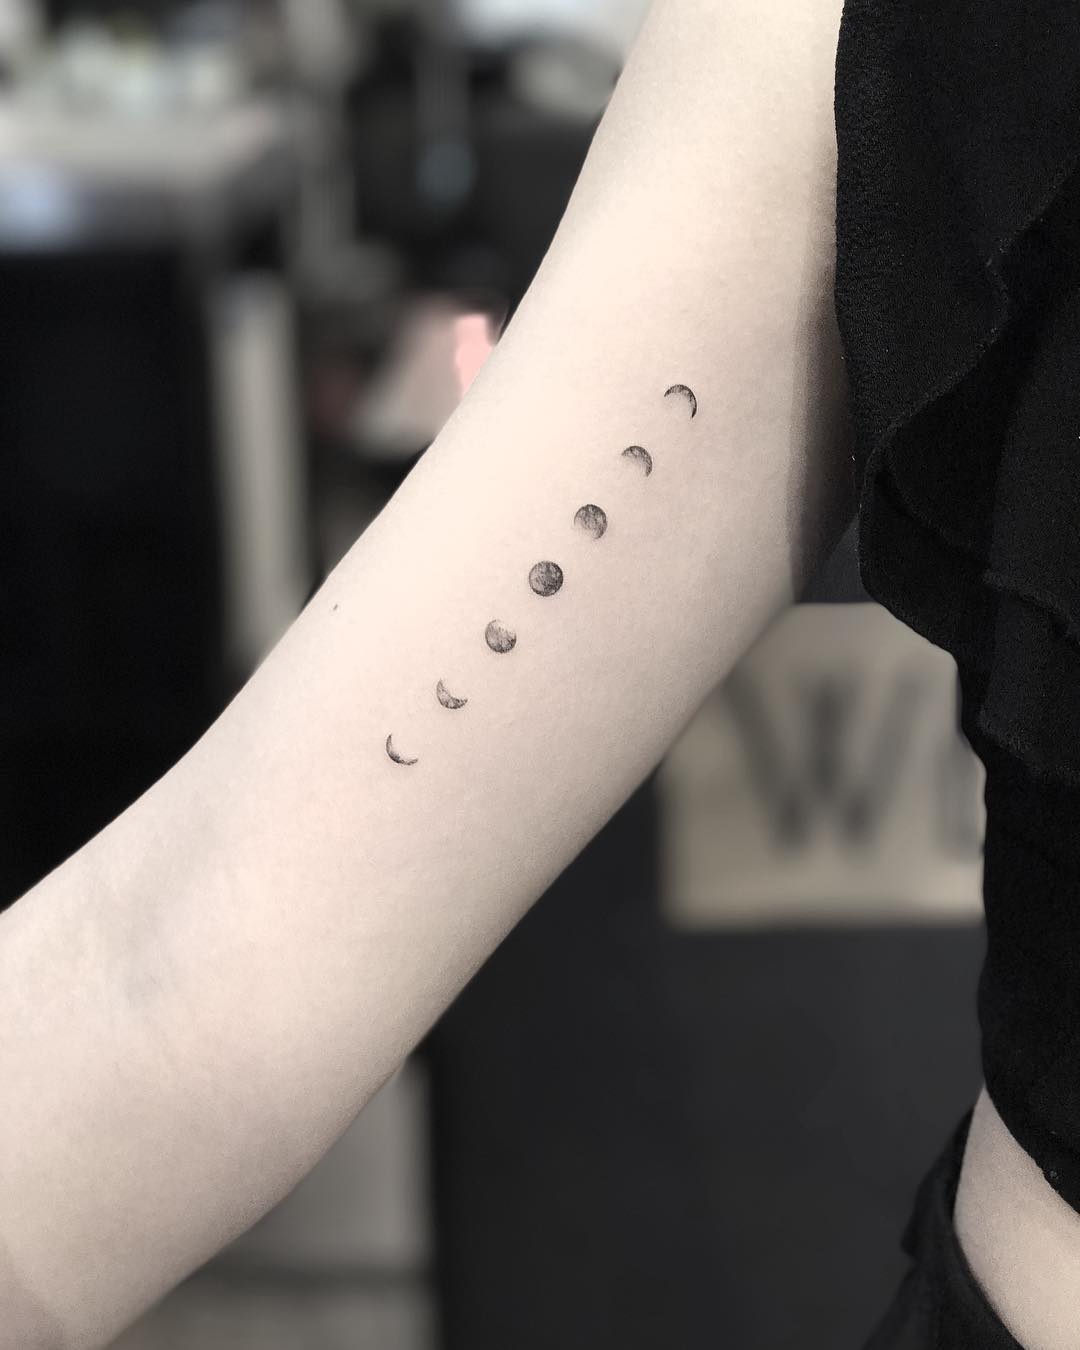 Girl with a tattoo of the transition of the moons